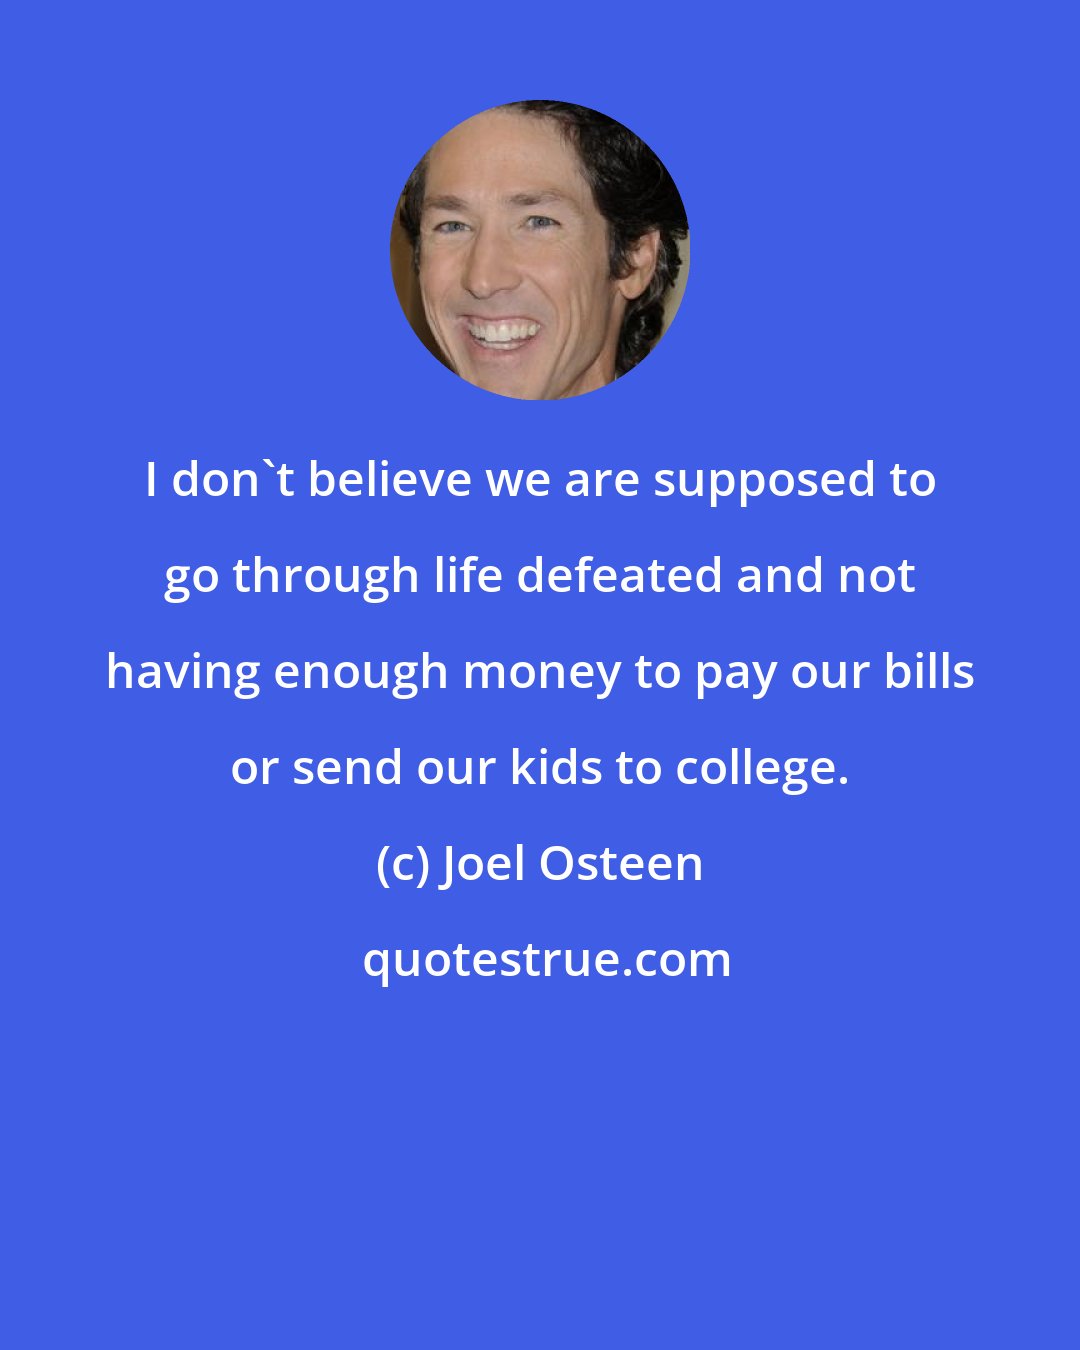 Joel Osteen: I don't believe we are supposed to go through life defeated and not having enough money to pay our bills or send our kids to college.